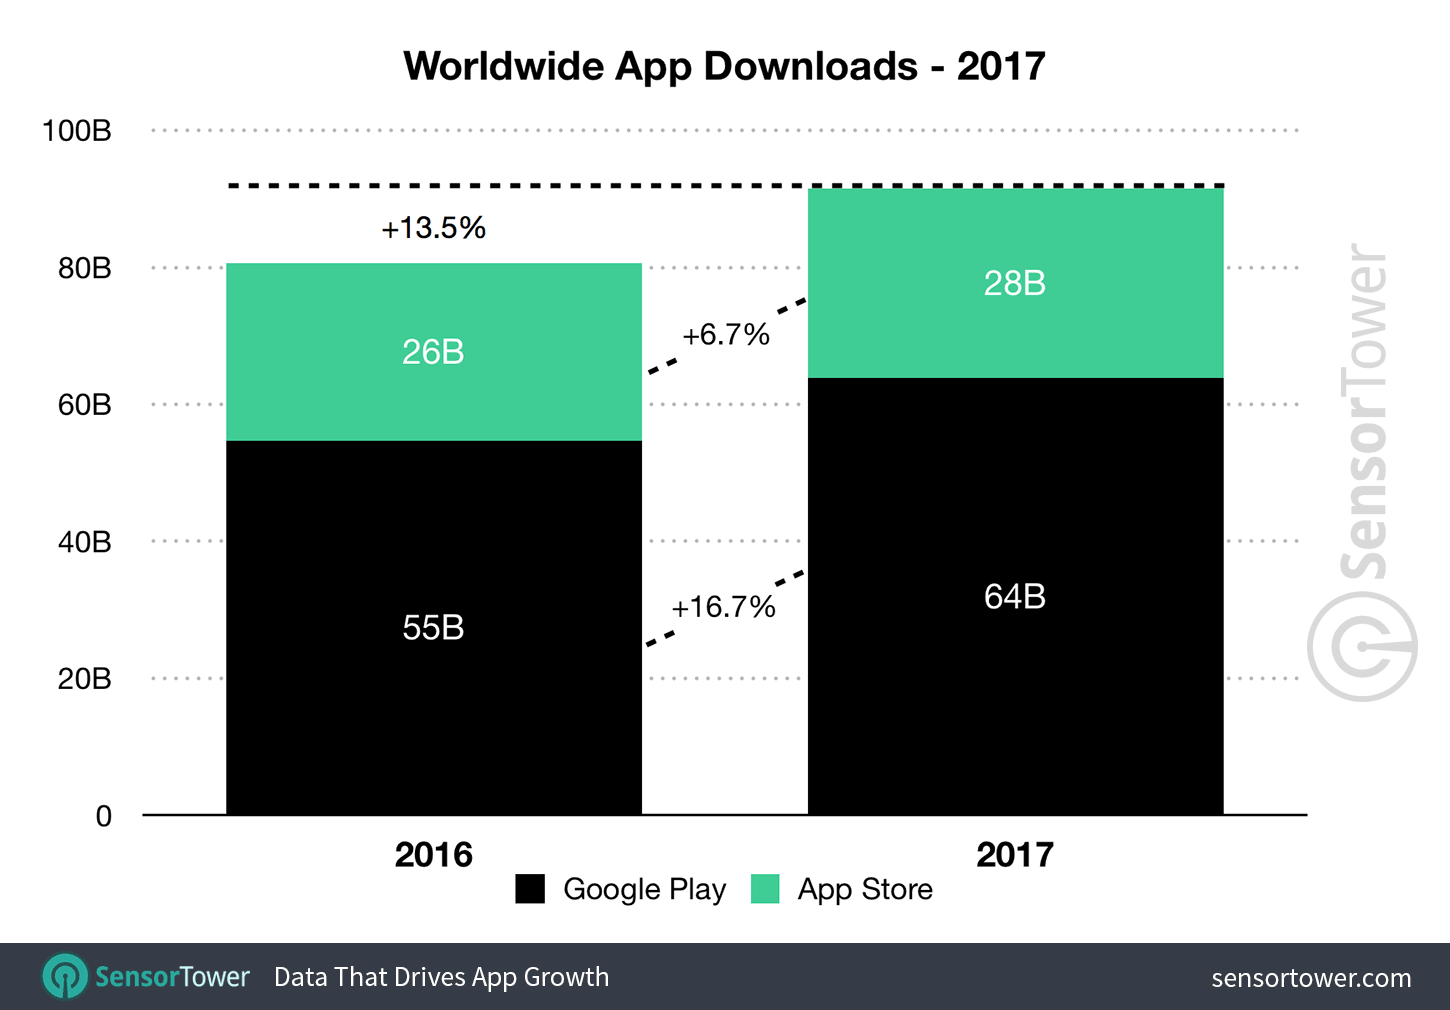 App downloads (App Store and Google Play) in 2017